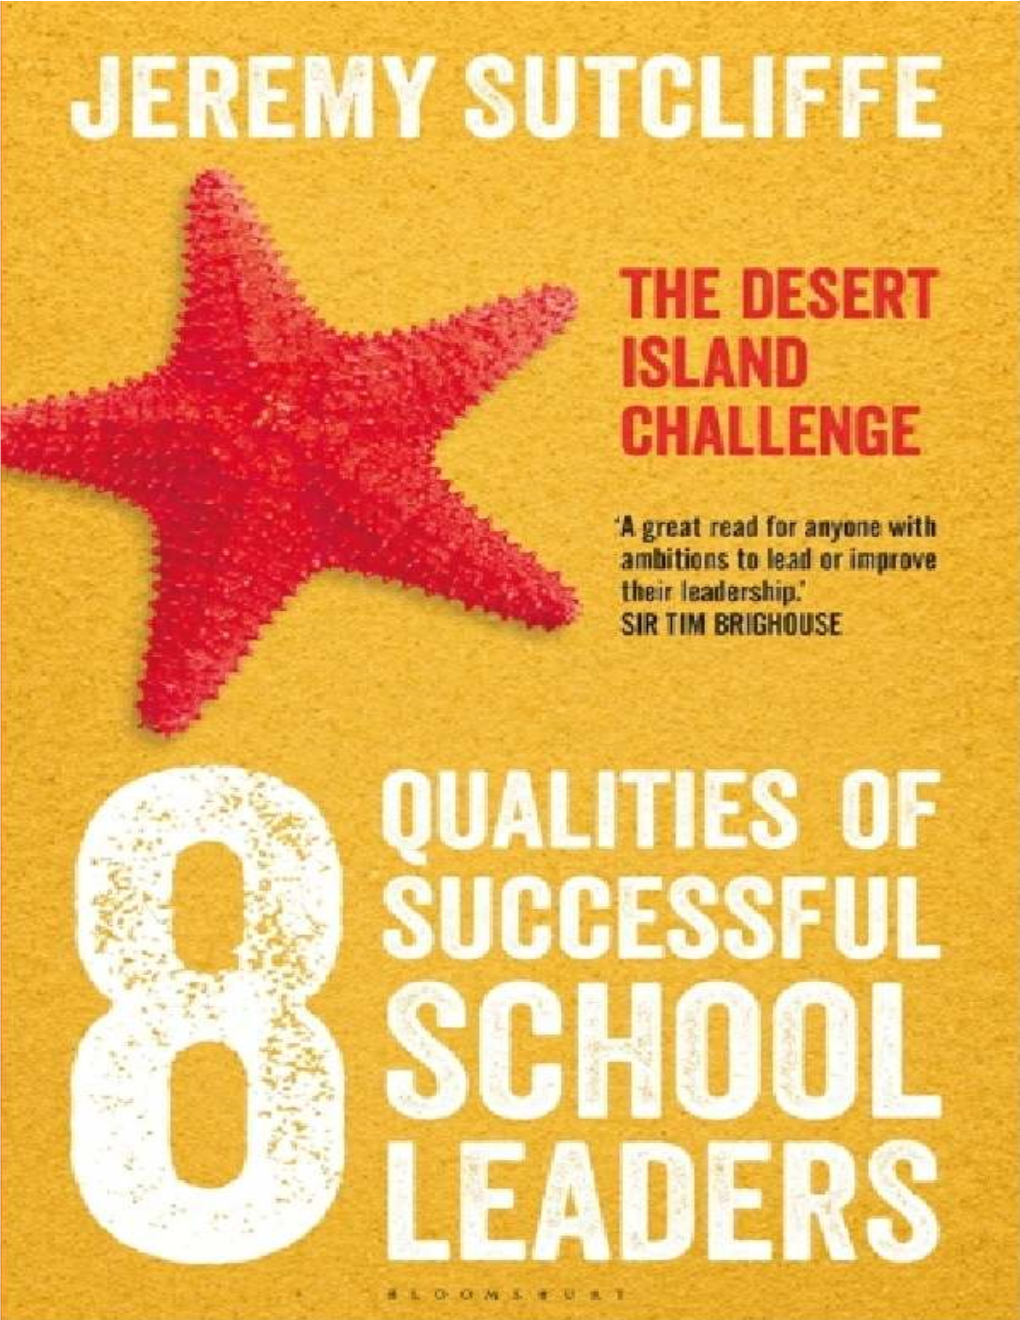 8 Qualities of Successful School Leaders the Desert Island Challenge Jeremy Sutcliffe Contents Acknowledgements Introduction: the Desert Island Challenge